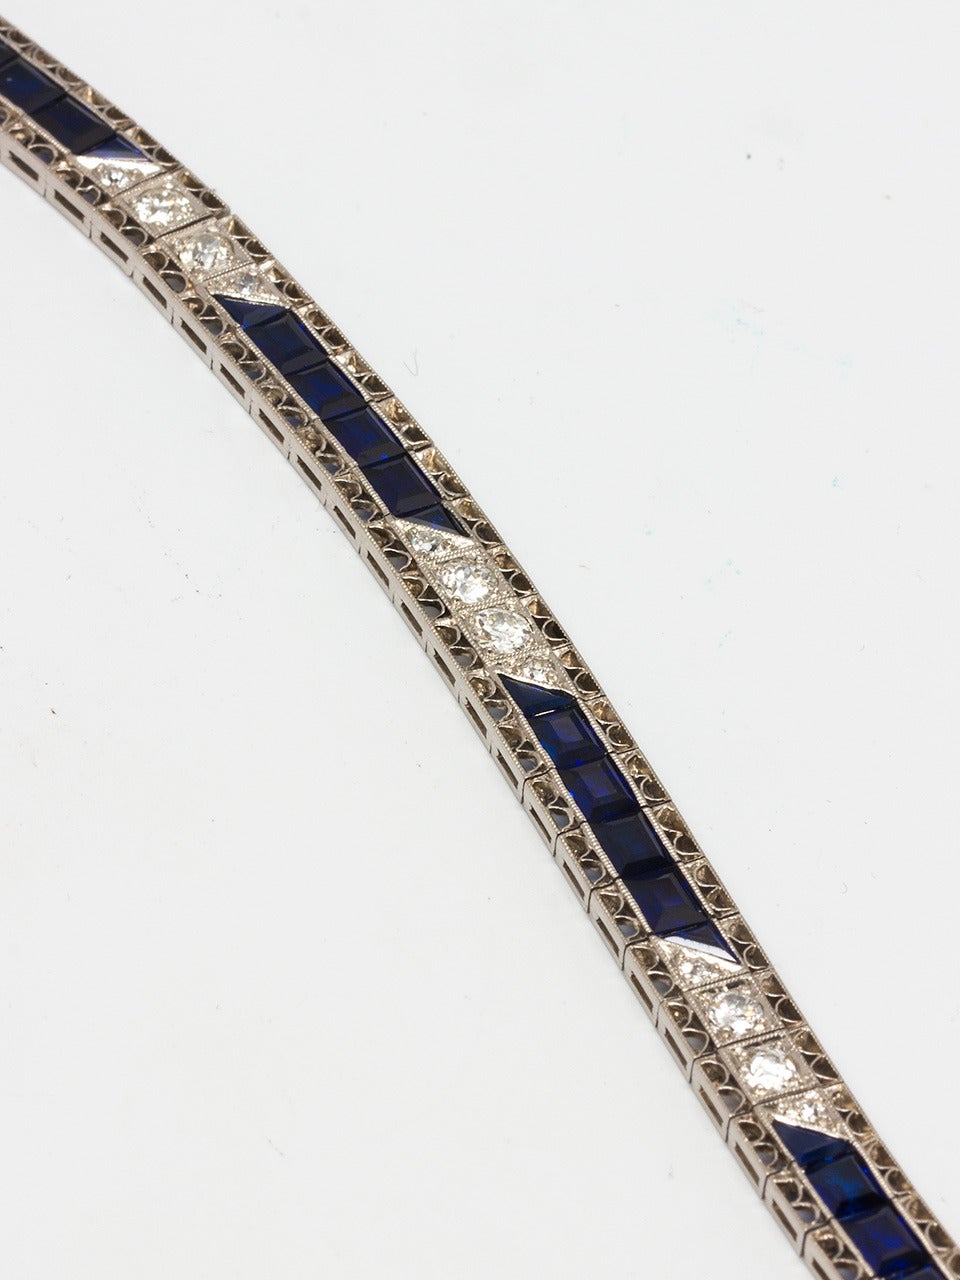 Lady's platinum Art Deco line bracelet with Old European Cut diamonds. 8 at 0.20 carat and 9 at 0.03 carat, totaling 1.87 carats total. Alternating synthetic blue sapphires (all the rage of the era). Set in delicate filigree edges frame the stones